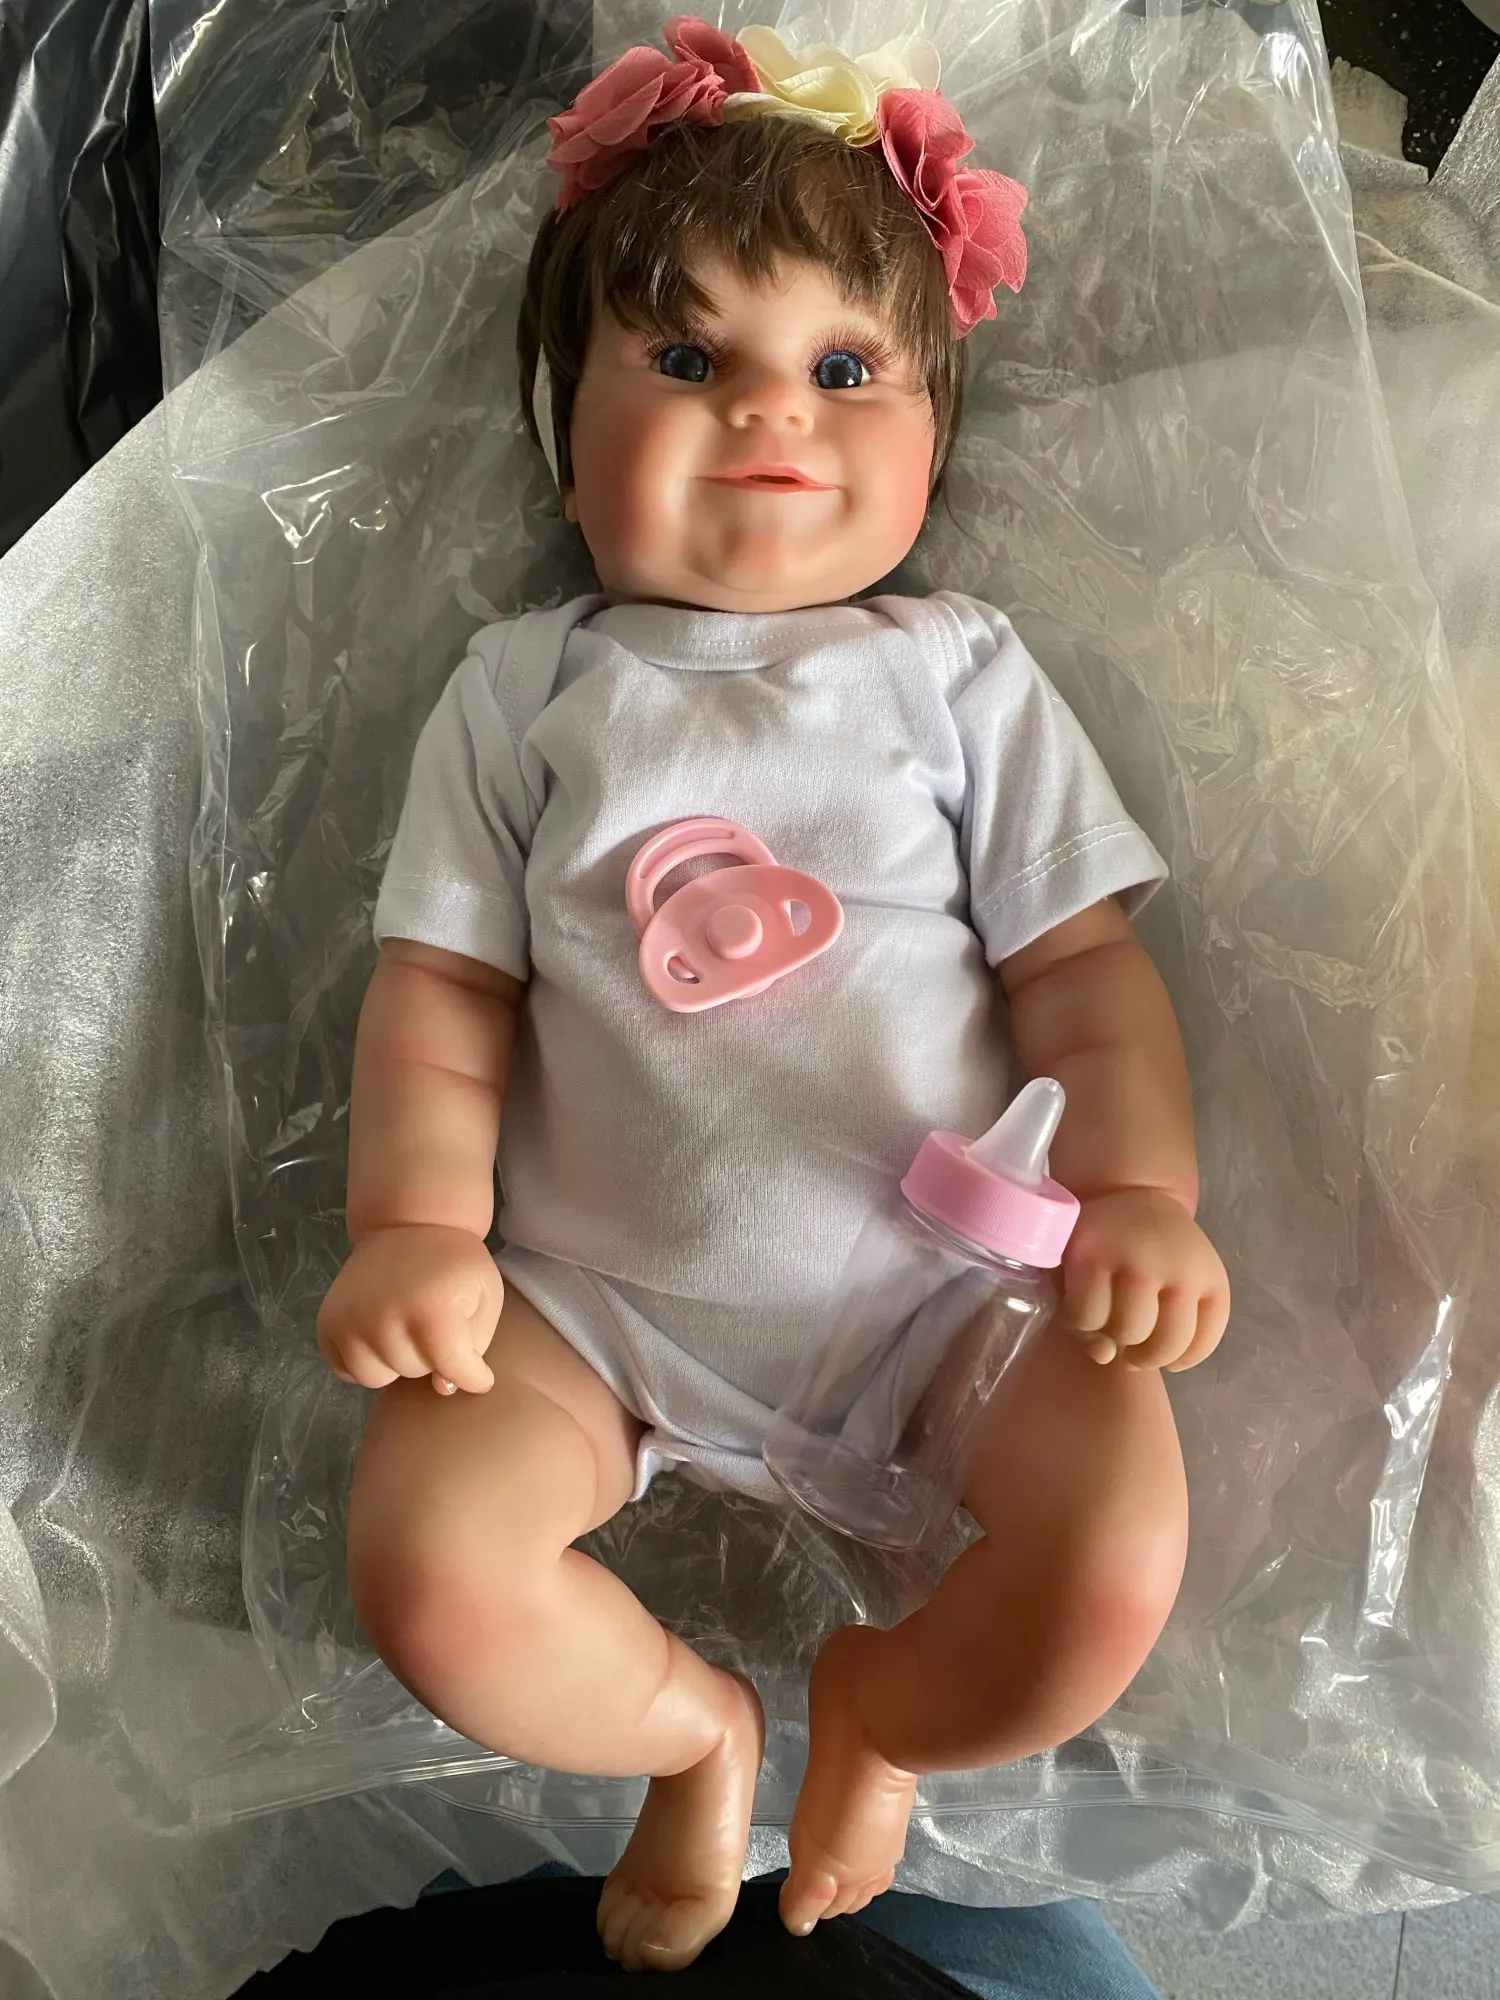 50CM Full Vinyl Body Girl Waterproof Reborn Doll Maddie Hand-Detailed Painted with Visible Veins Lifelike 3D Skin Tone Toy Gift photo review